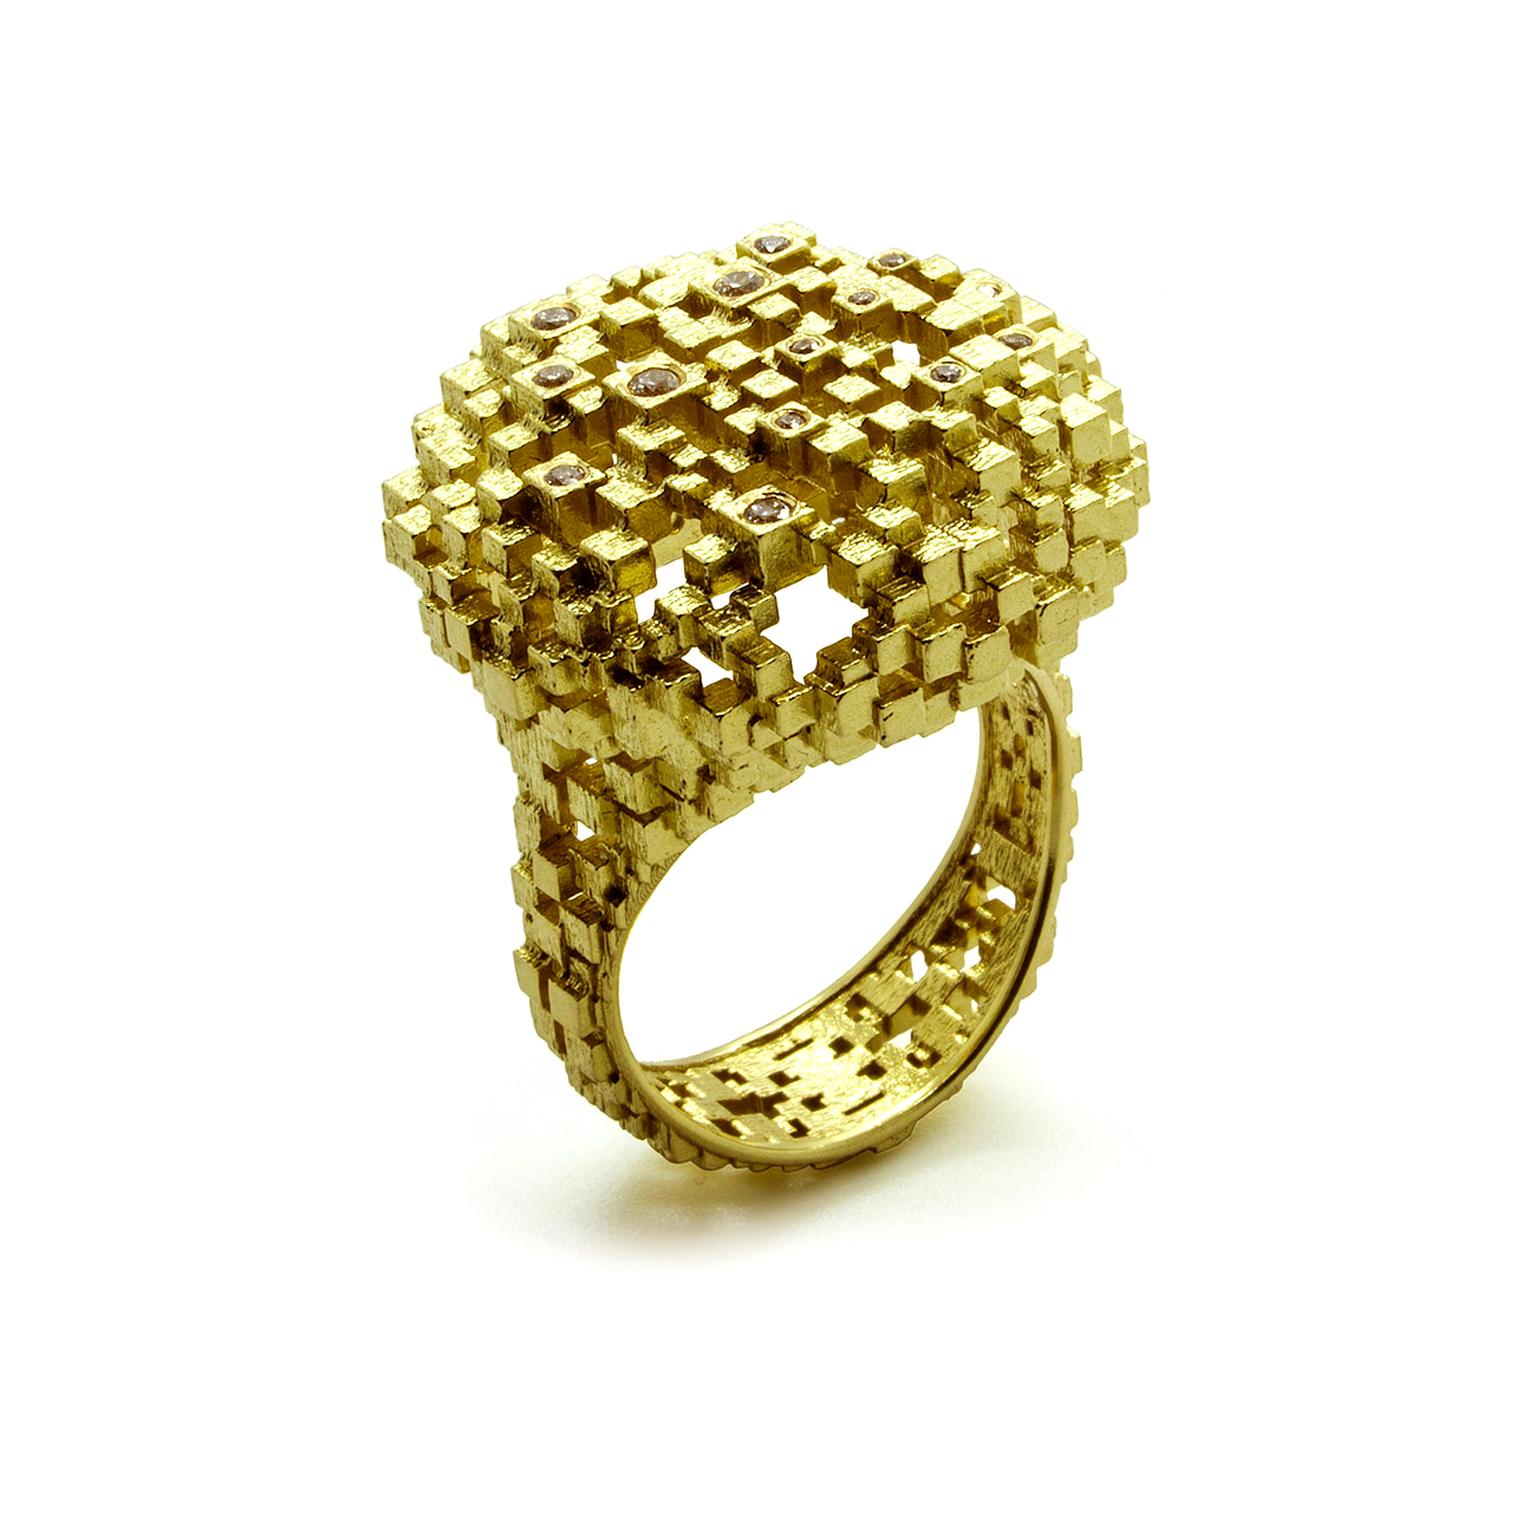 Revolutionising jewellery design with 3D printing